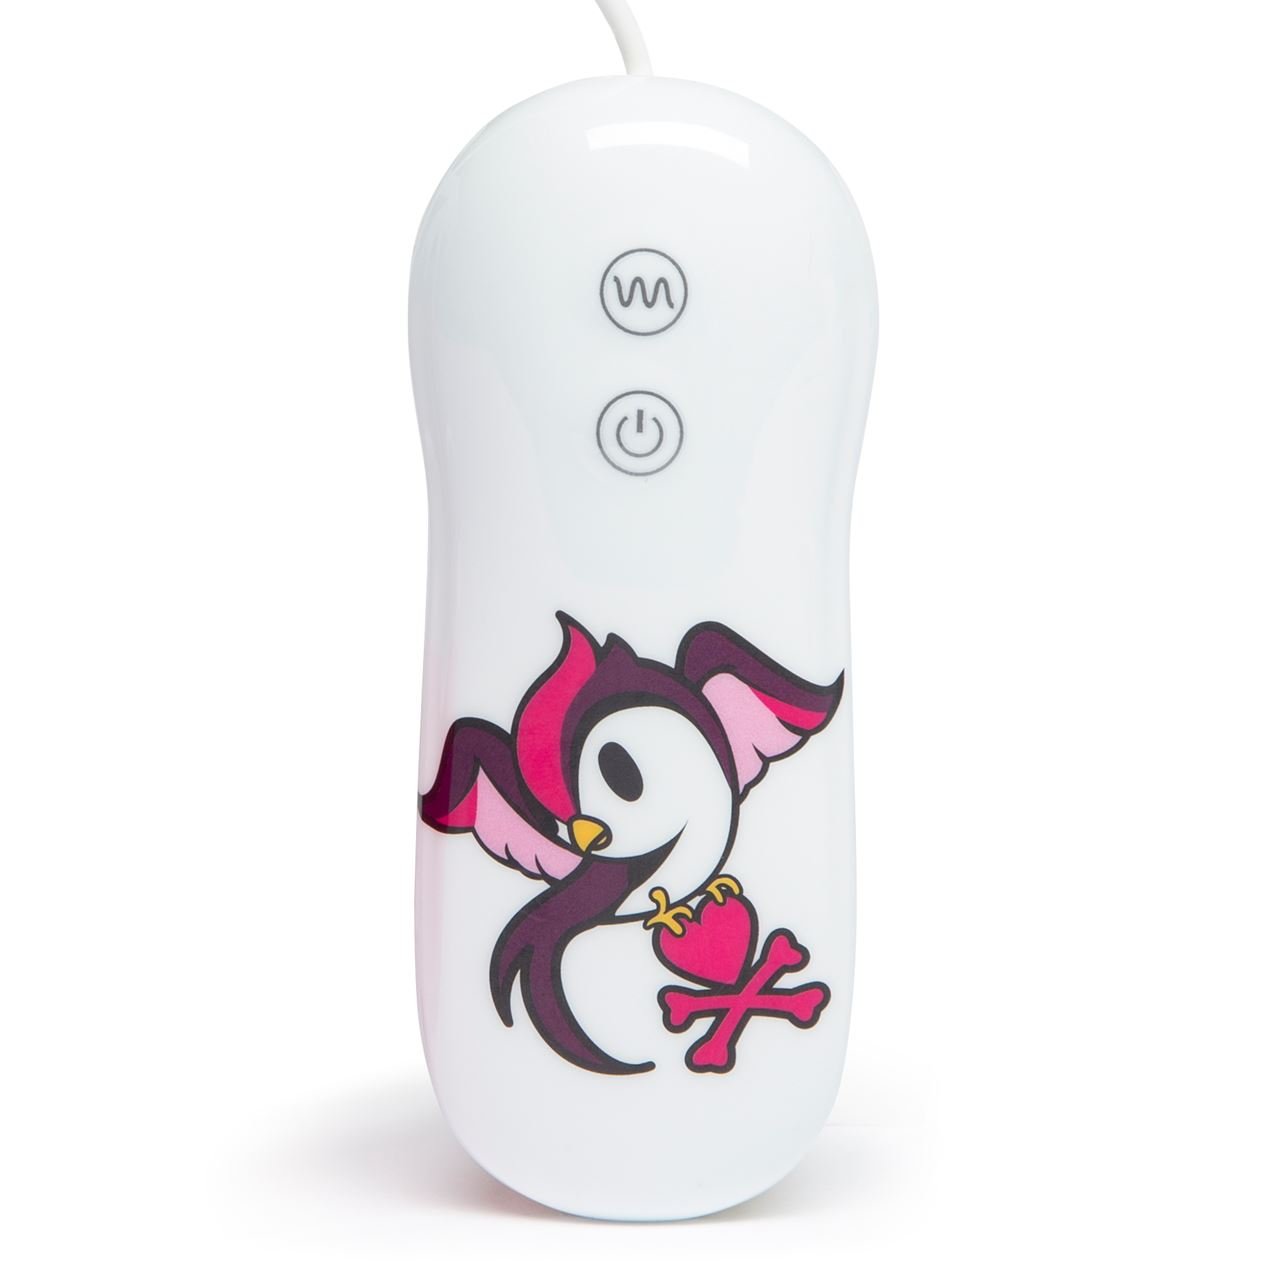 Tokidoki 10 Function Silicone Clitoral Vibrator swoop Pink Heart